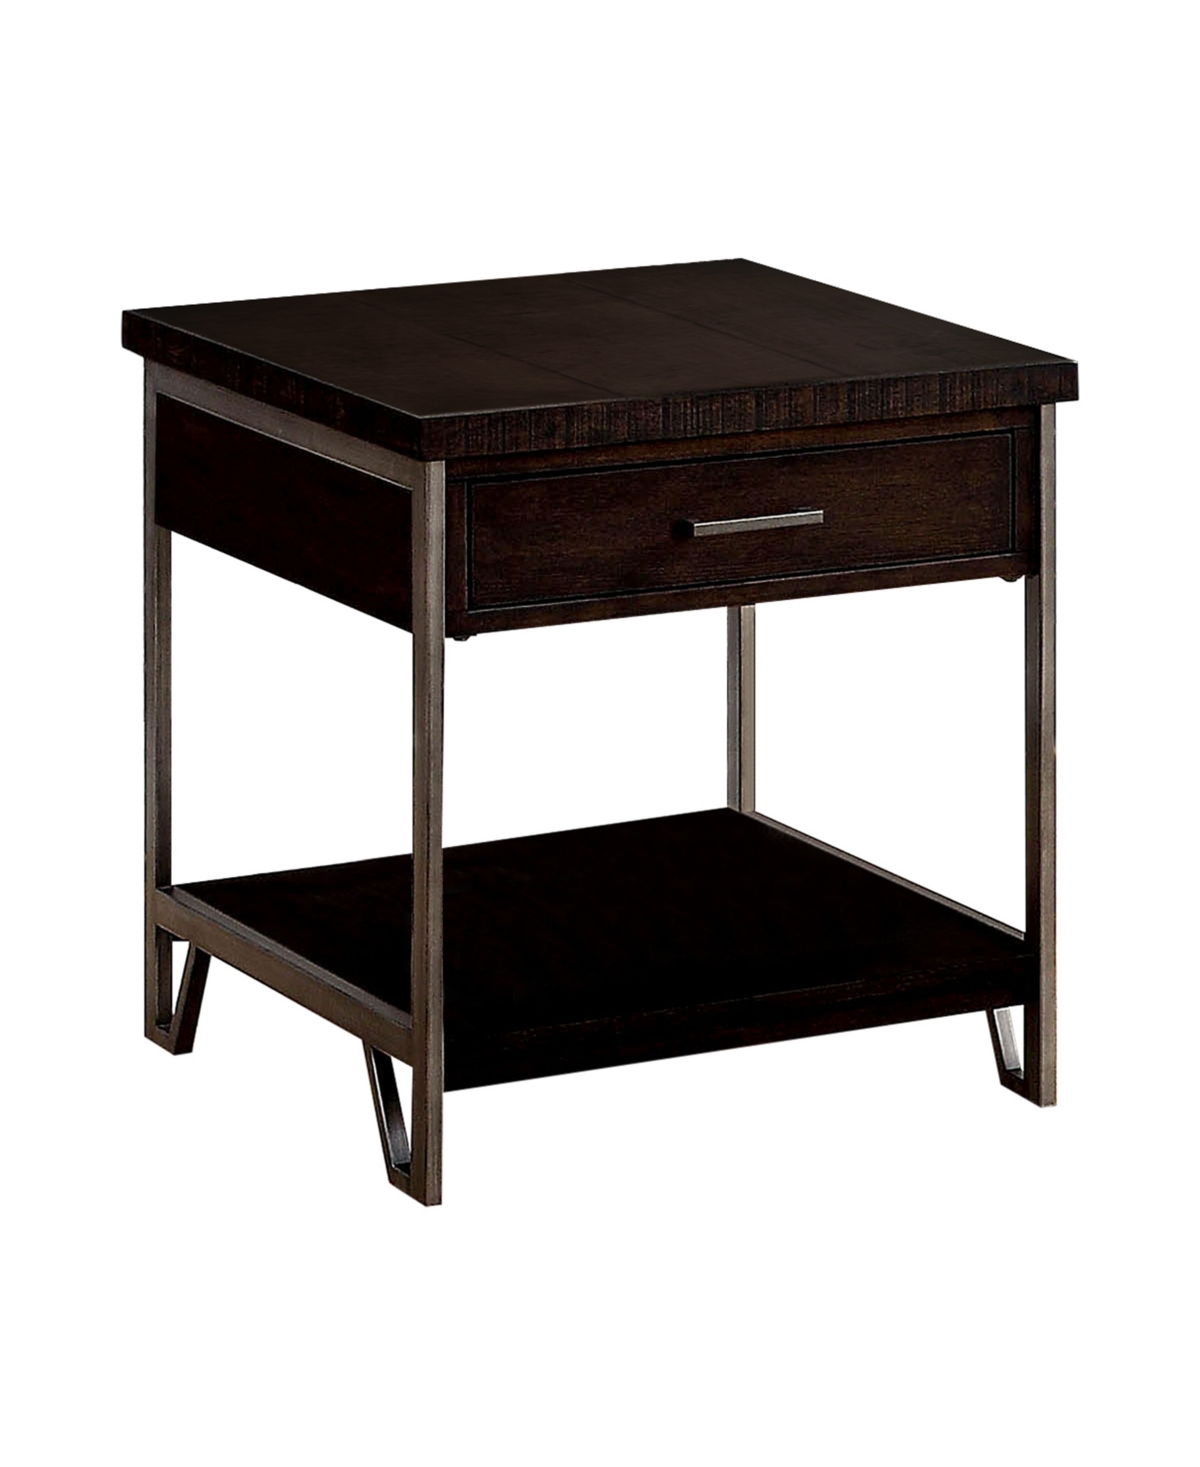 of America Malleena 1 Drawer End Table